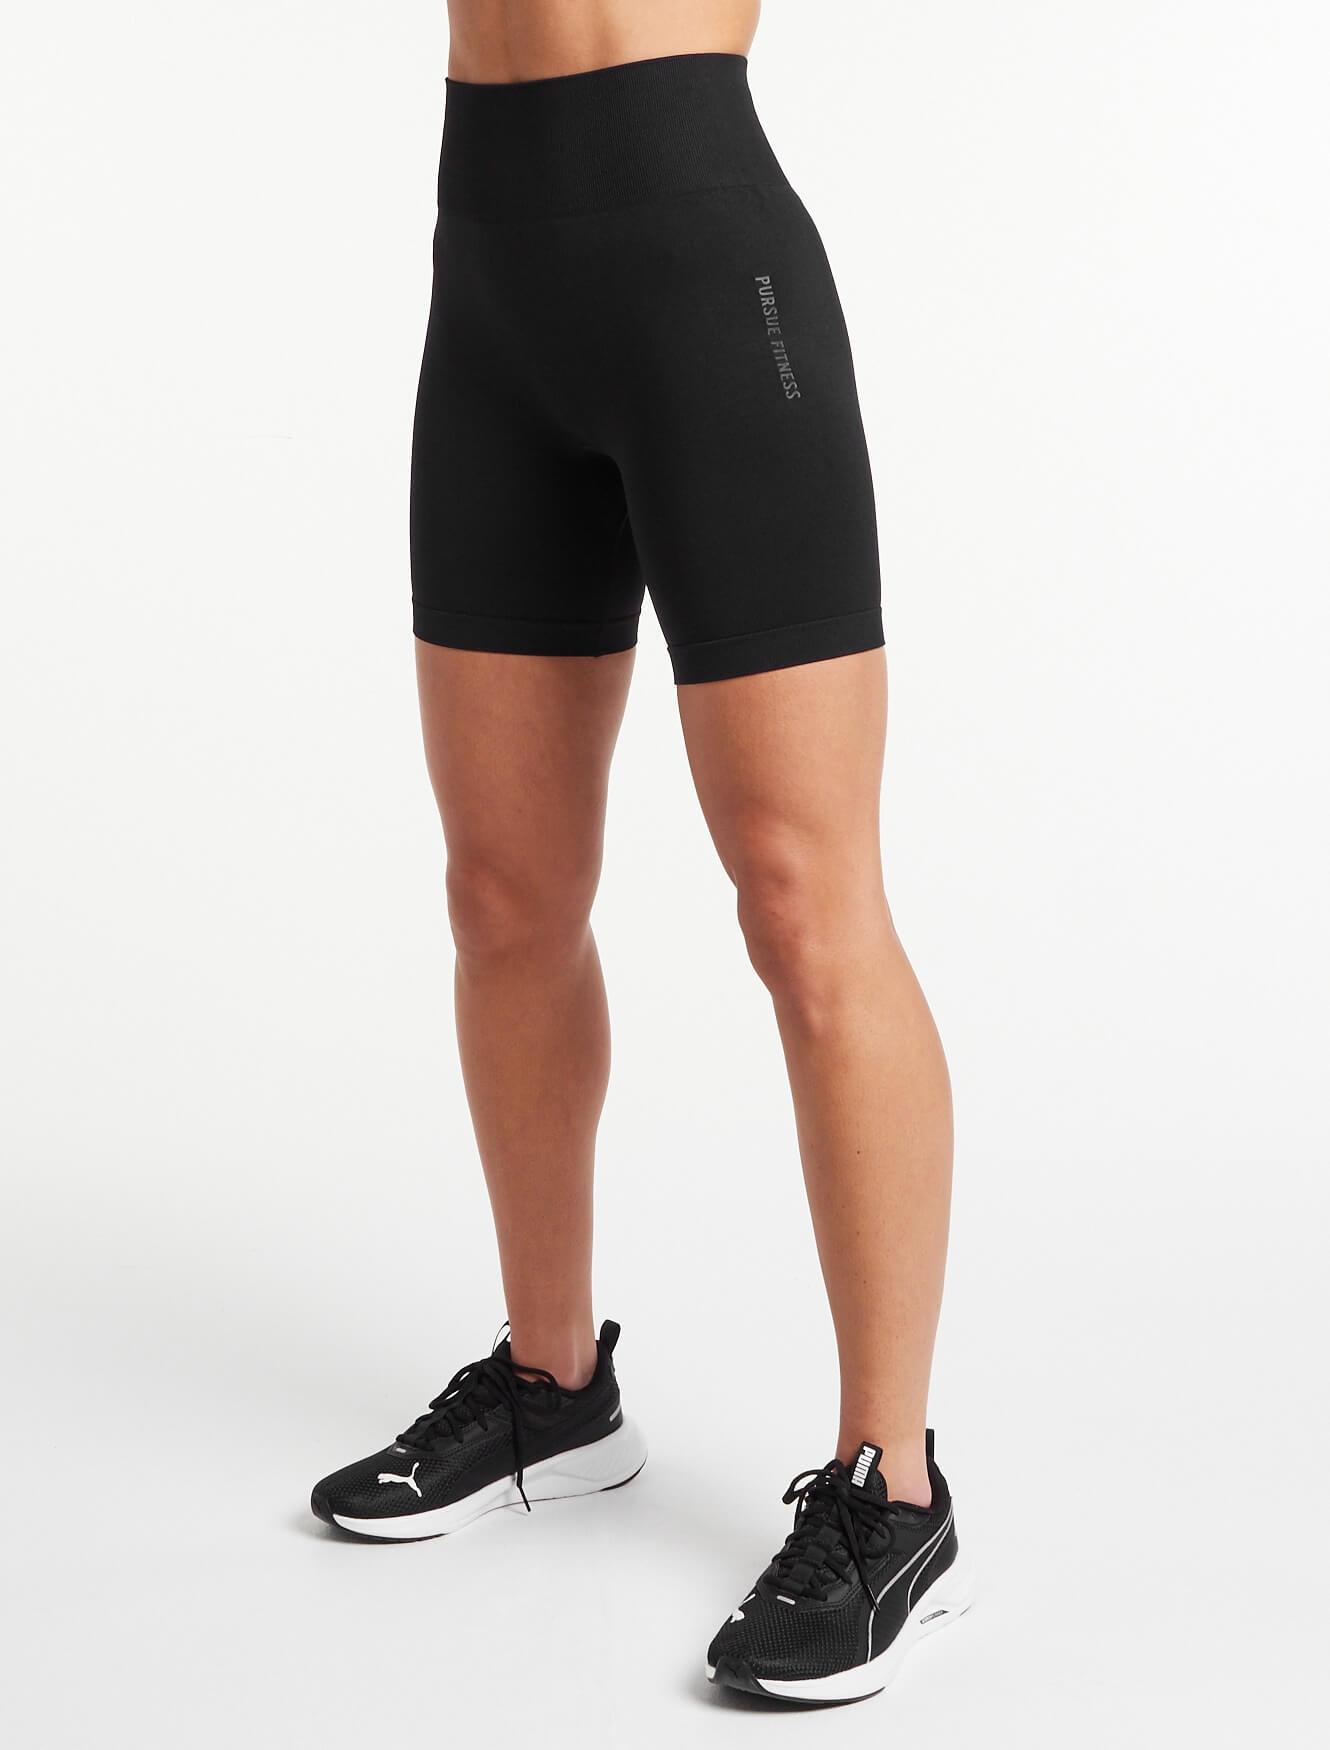 Afterglow Seamless Cycling Shorts | Blackout | Pursue Fitness